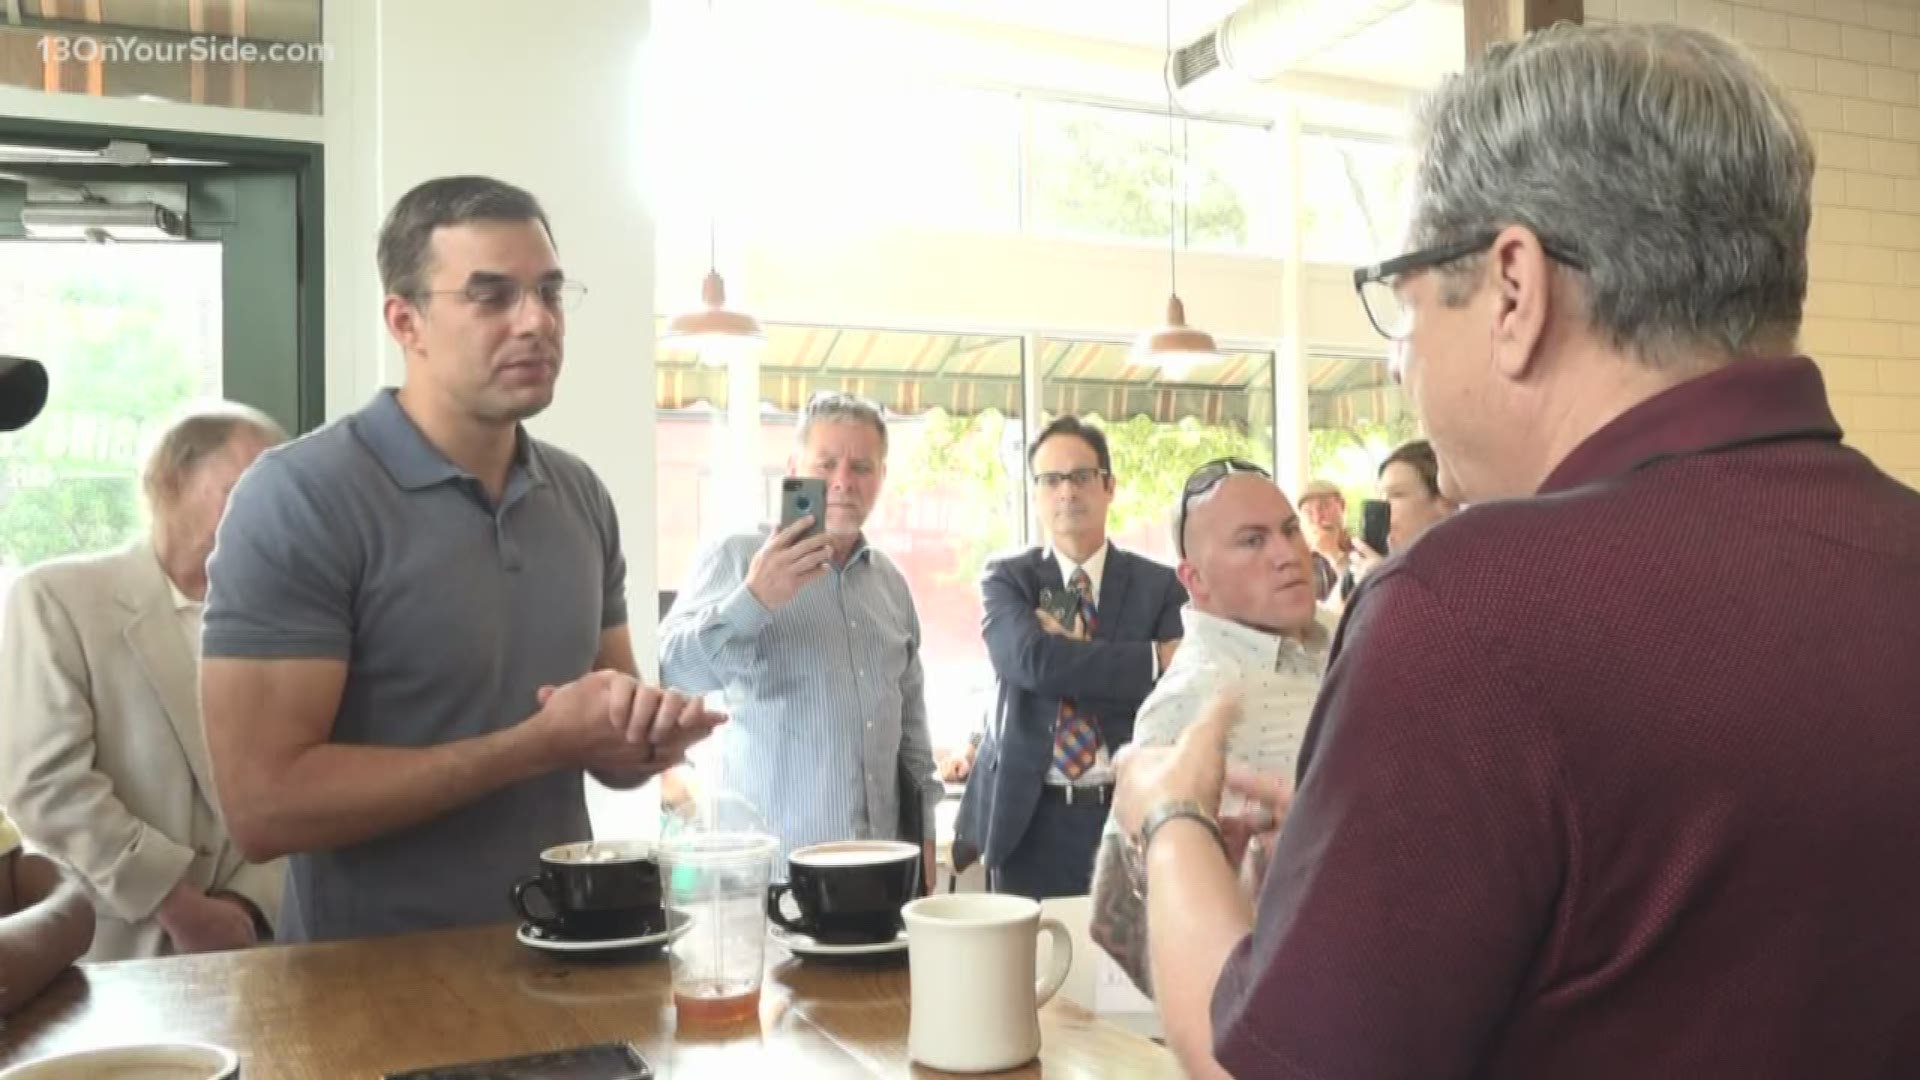 Amash planned five meetings at coffee shops around the Grand Rapids area.